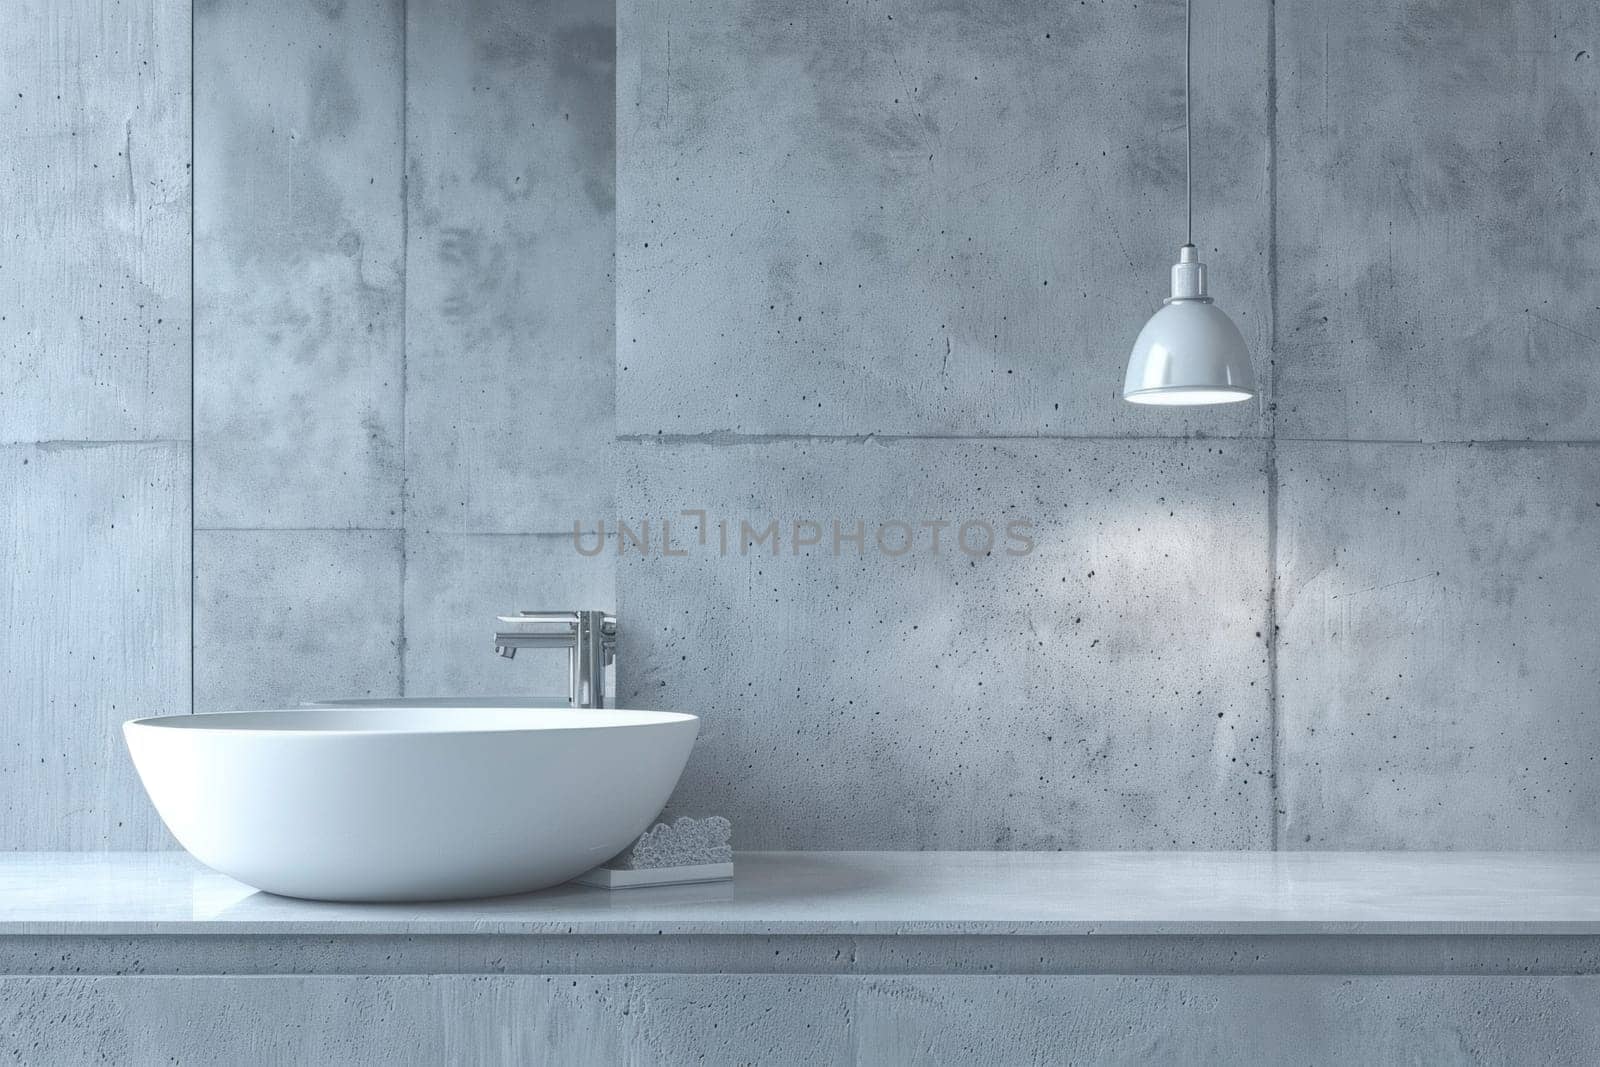 Modern bathroom design with white sink, hanging light, and concrete wall in minimalist style for interior decor and home improvement by Vichizh